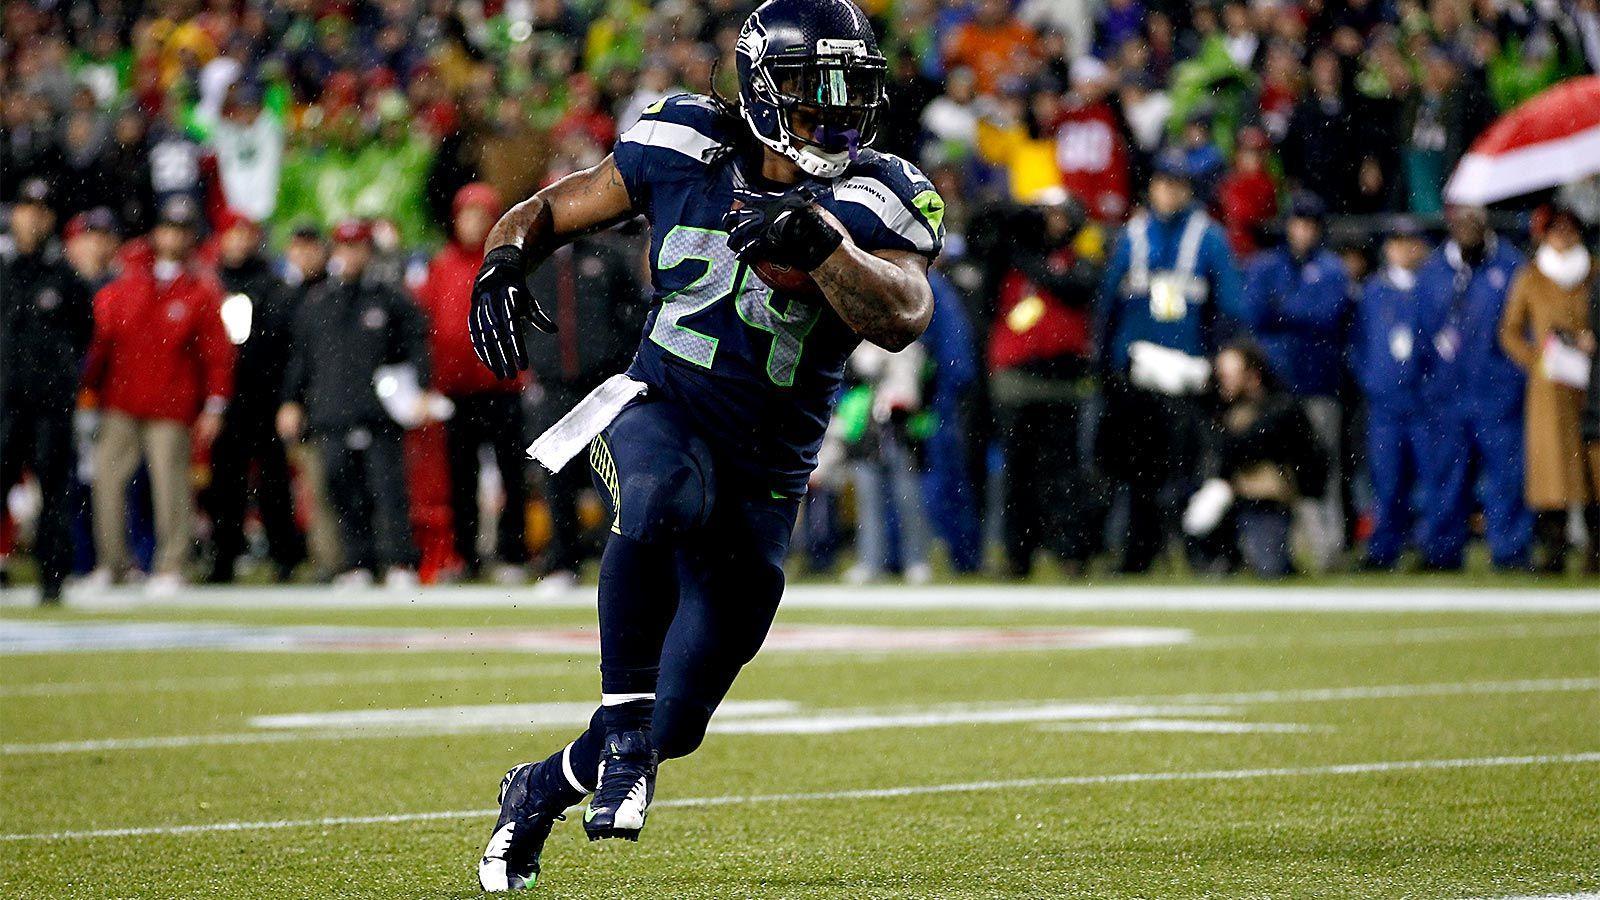 Suggestions Online. Image of Marshawn Lynch Wallpaper 2013